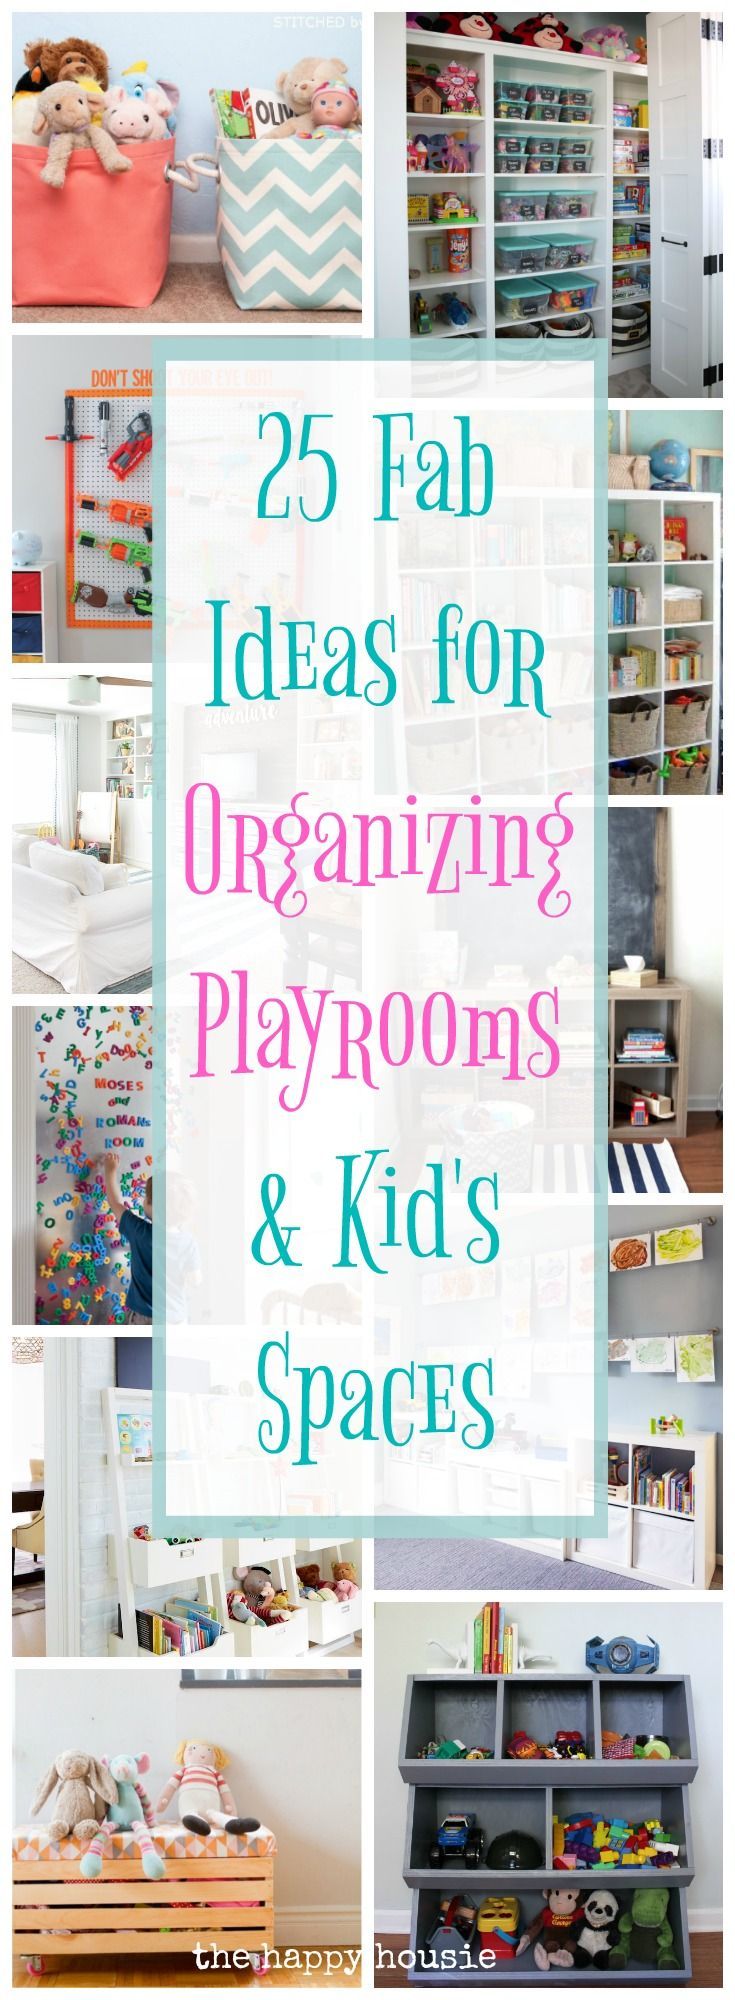 25 Fab Ideas for Organizing Playrooms & Kid's Spaces -   24 diy kids storage
 ideas